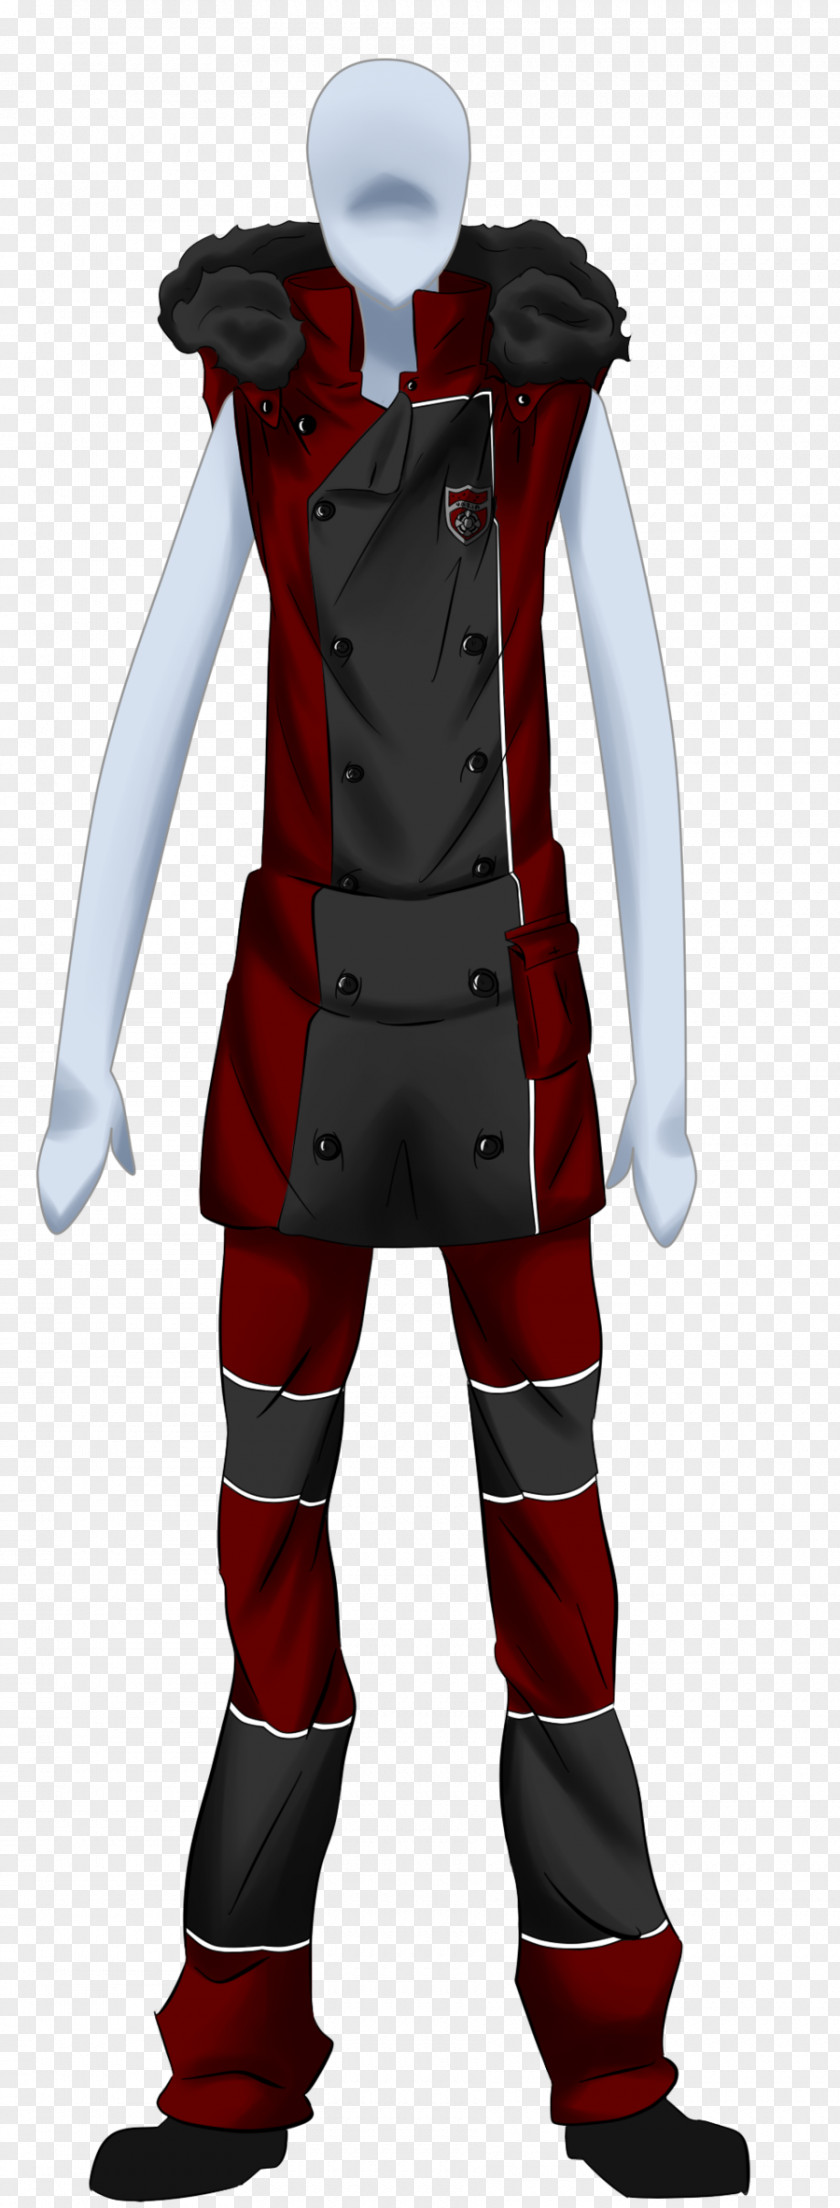 Varia Costume Design Character Fiction PNG